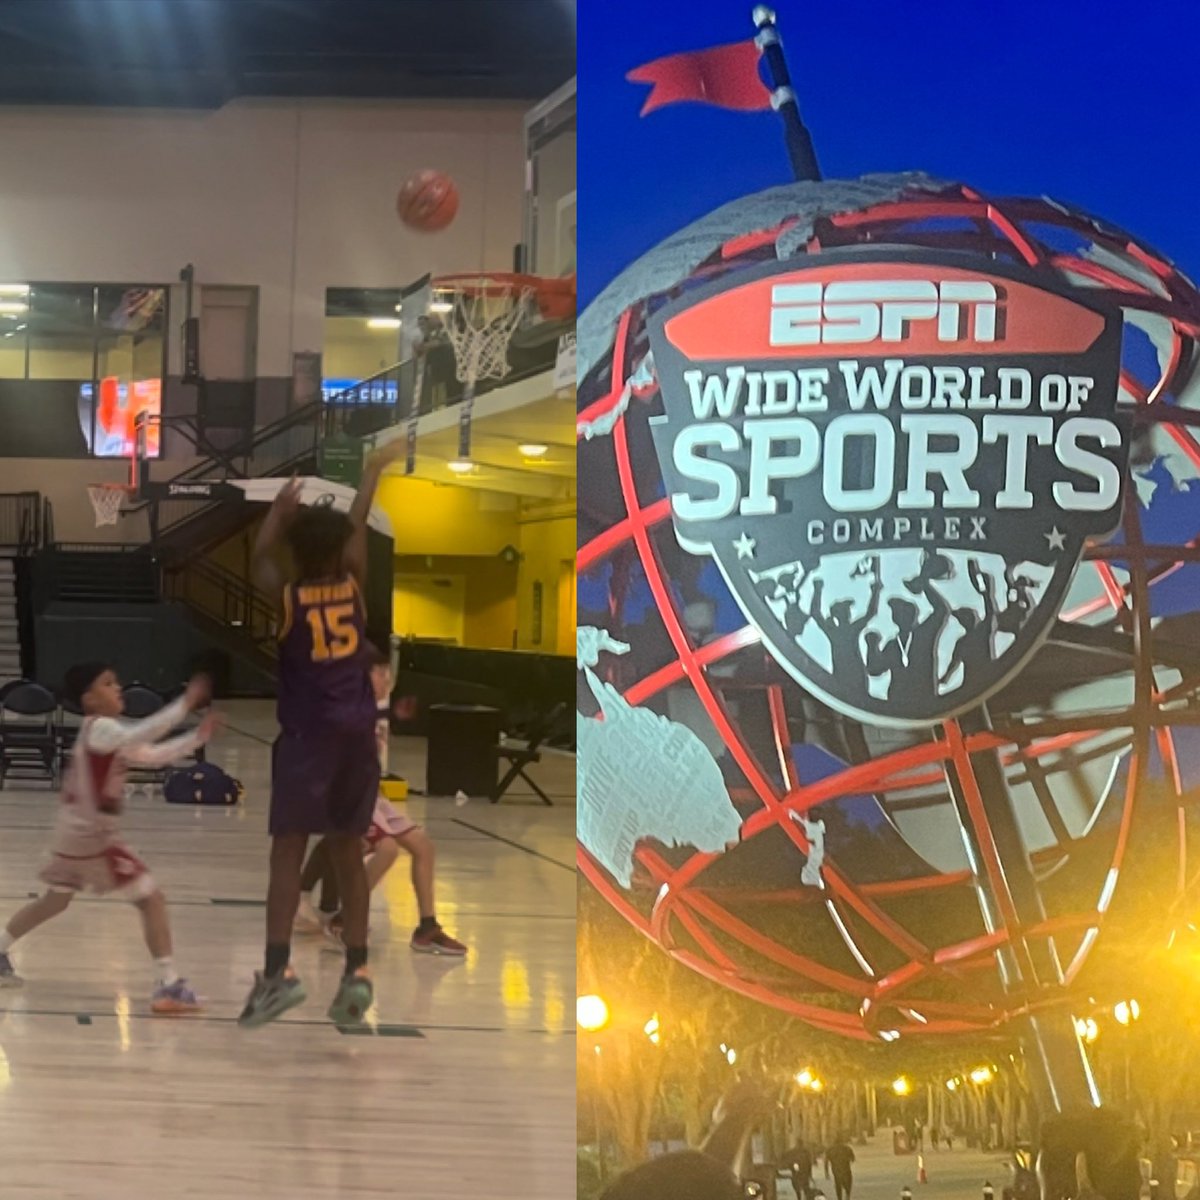 Watching my SonShine Ball tf OUT in front of thousands of people at AAU Nationals @ Disney World…

Priceless 🥹

#WideWorldOfSports
#DisneyWorld
#Big15 
#MyTrizzyDaBaller 🏀